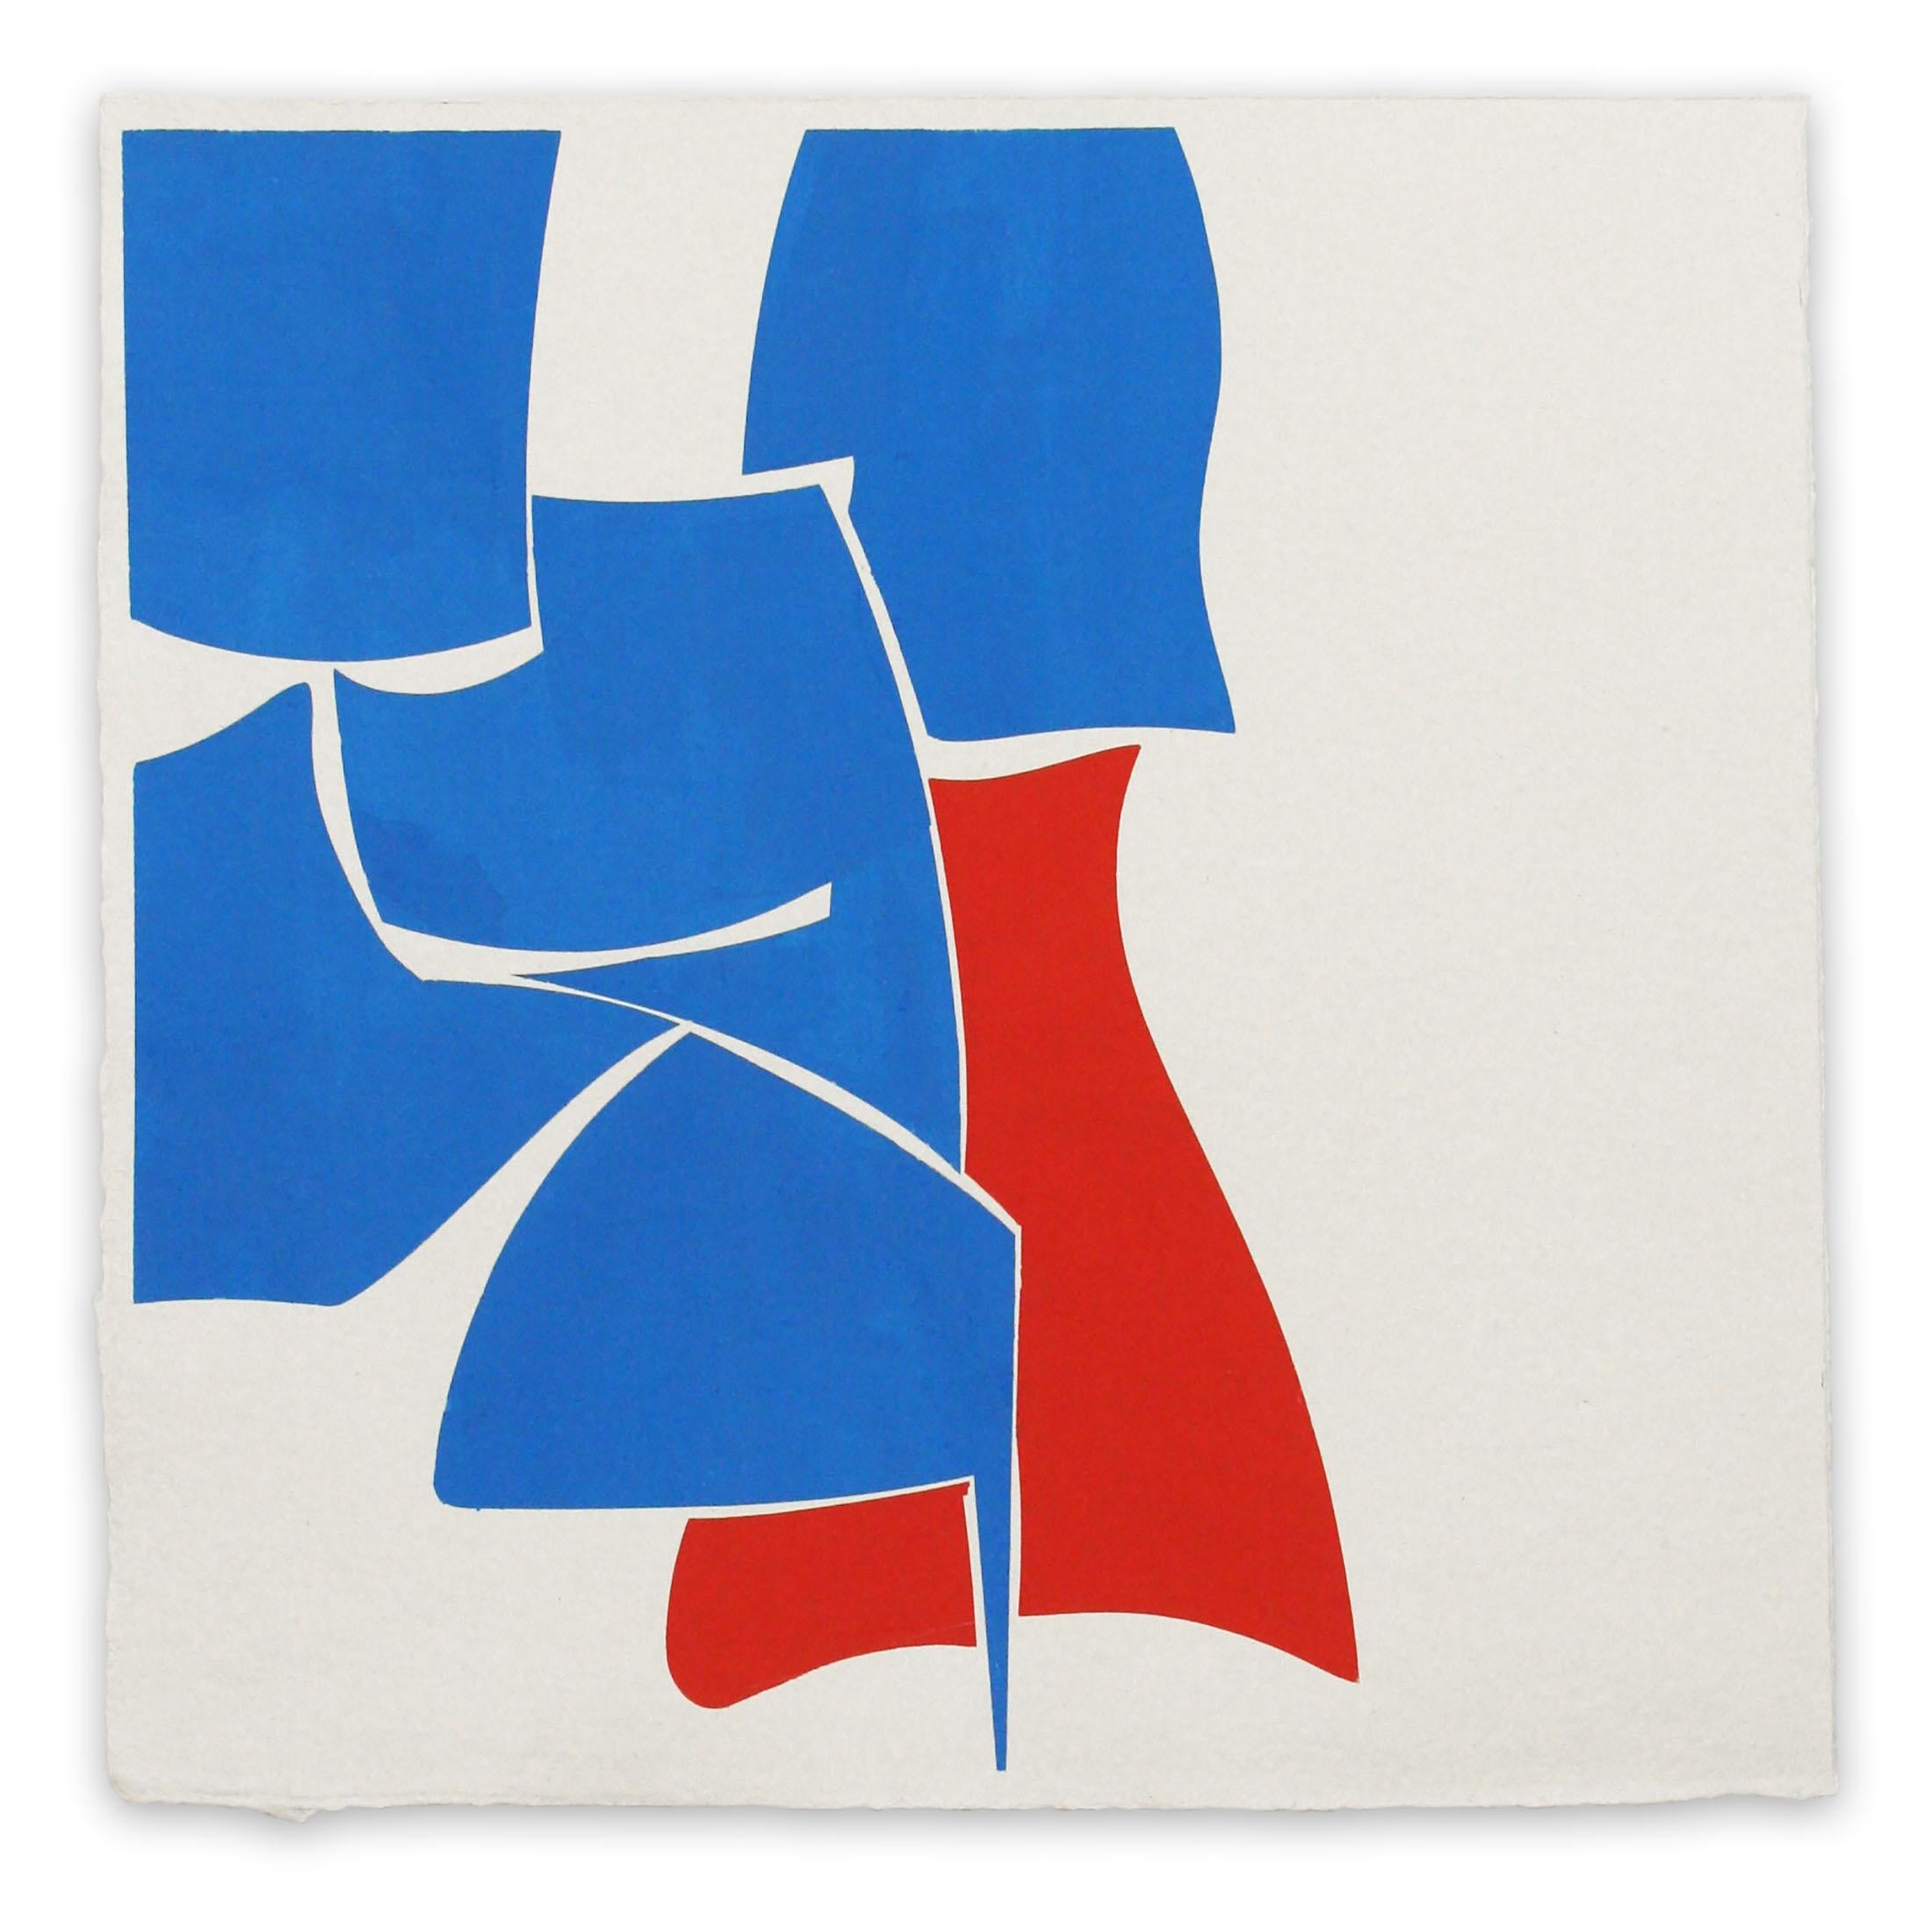 RB2 18 (Abstract Painting)

Gouache on handmade paper - Unframed.

Joanne Freeman's works on paper are made with gouache on handmade Indian Khadi paper.
She uses tape to mask out shapes and employ hard edges, working spontaneously, placing down a